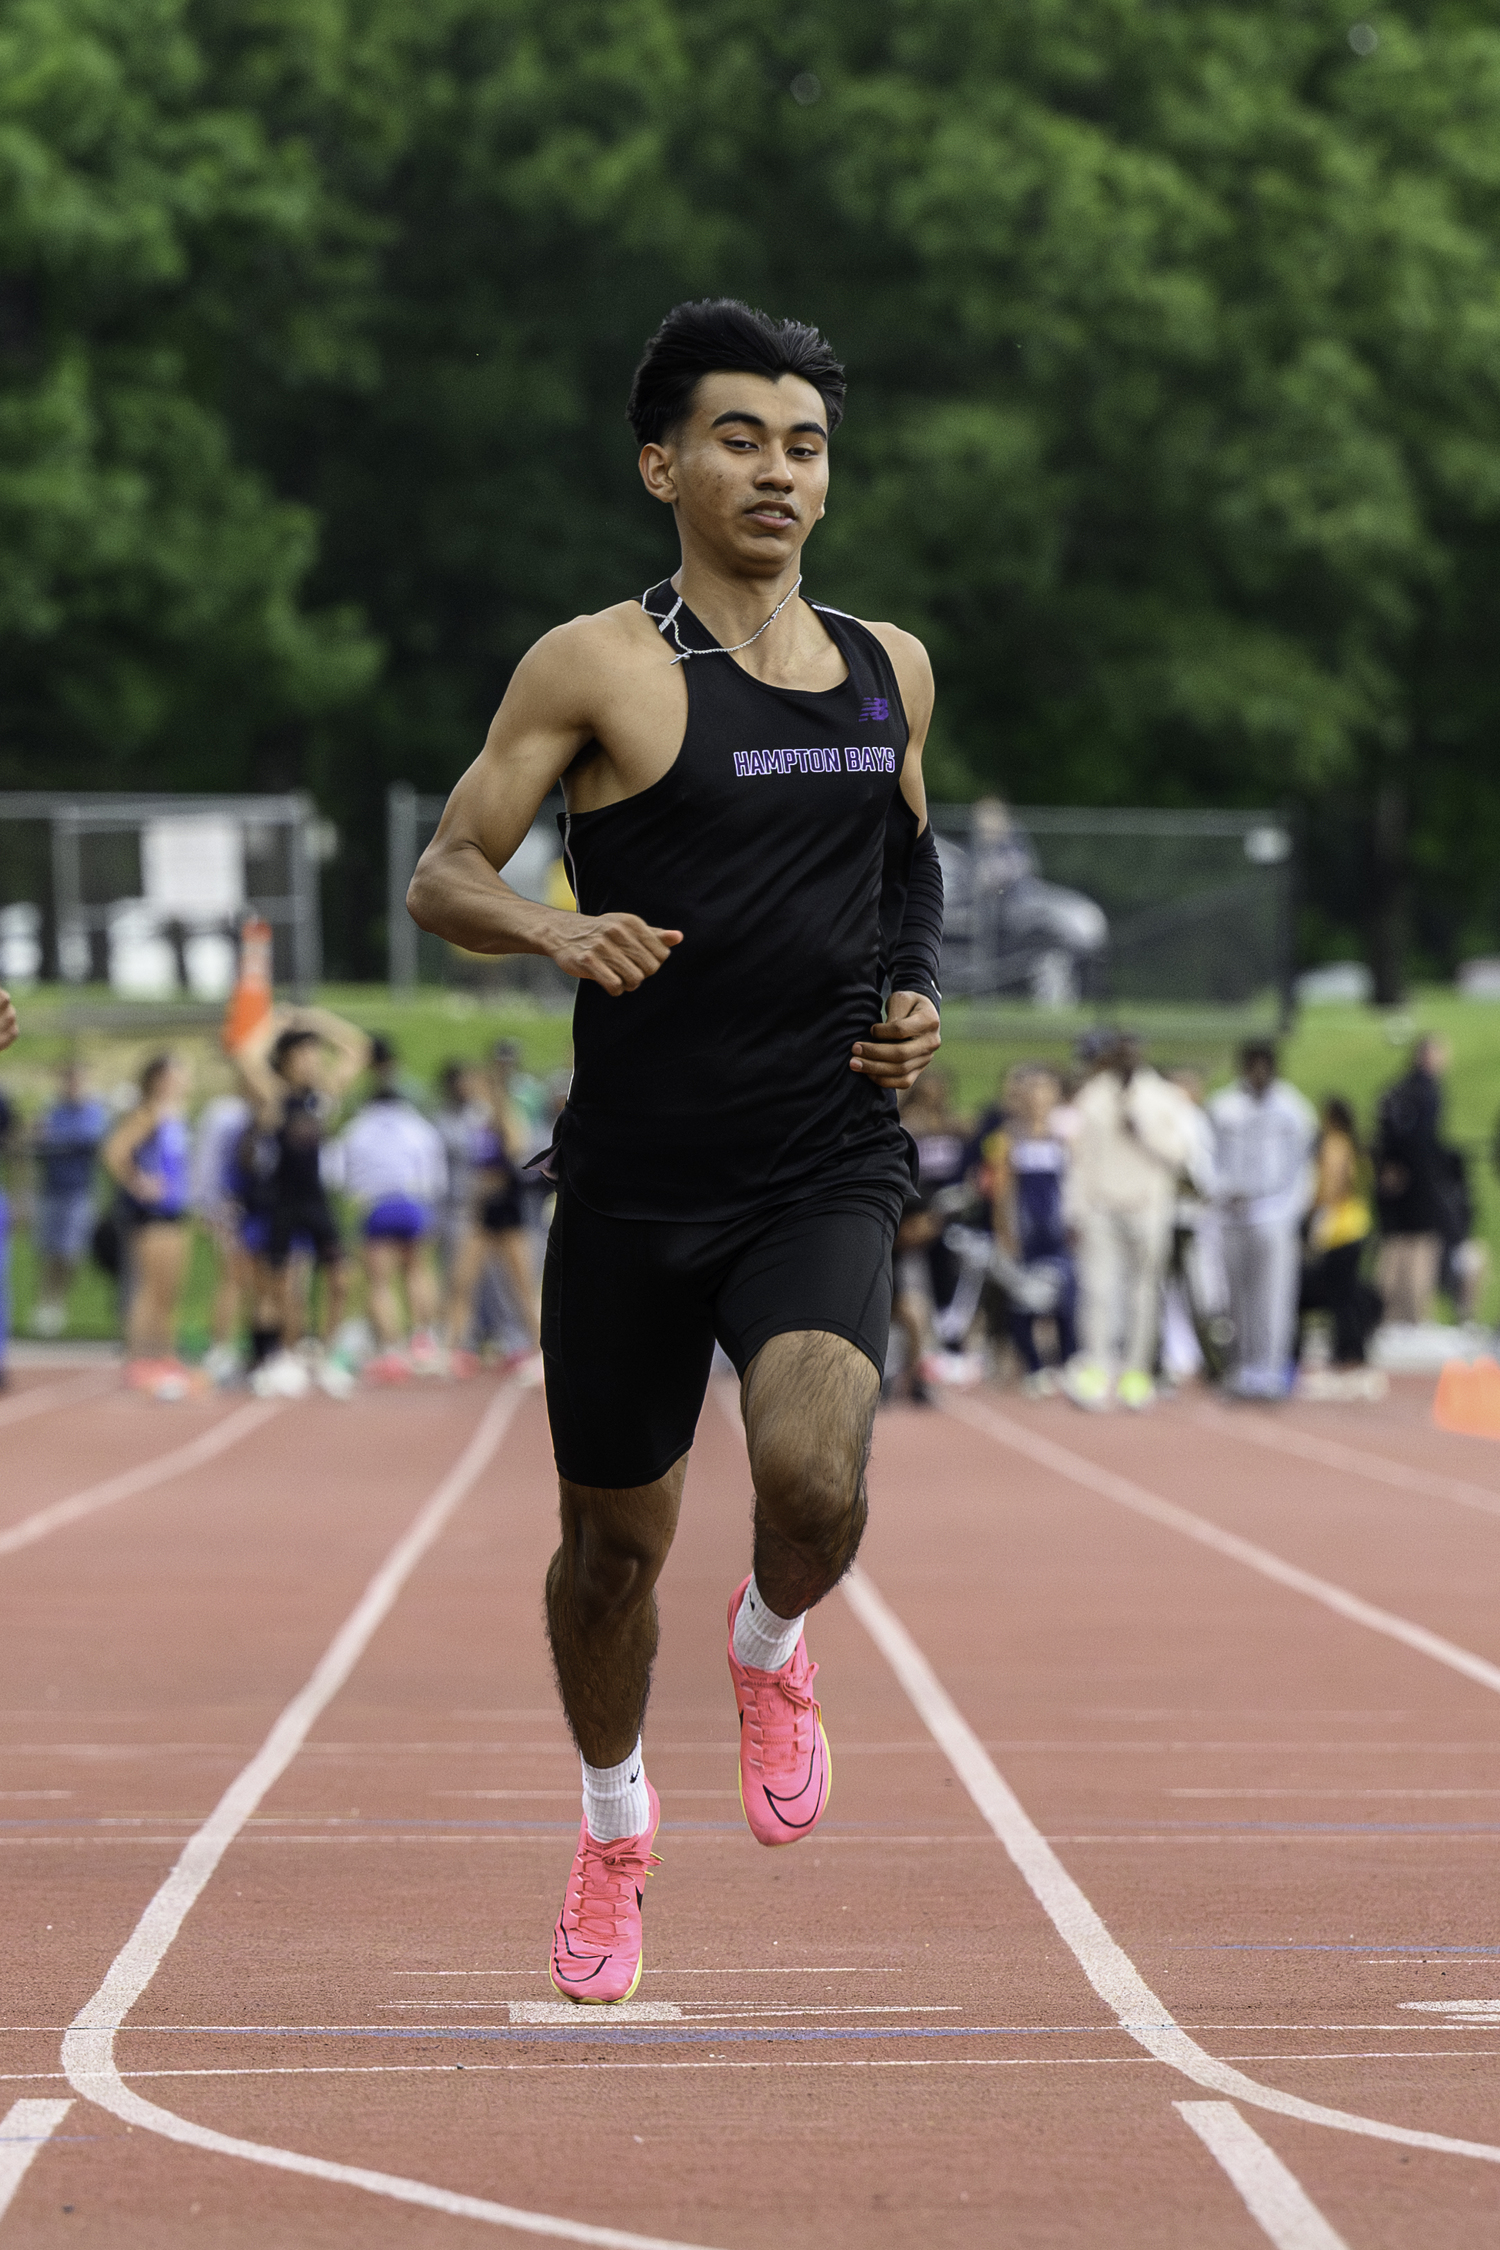 Hampton Bays senior Charlie Garcia placed sixth in the county and second among fellow Small Schools runners in the 100-meter dash.   MARIANNE BARNETT